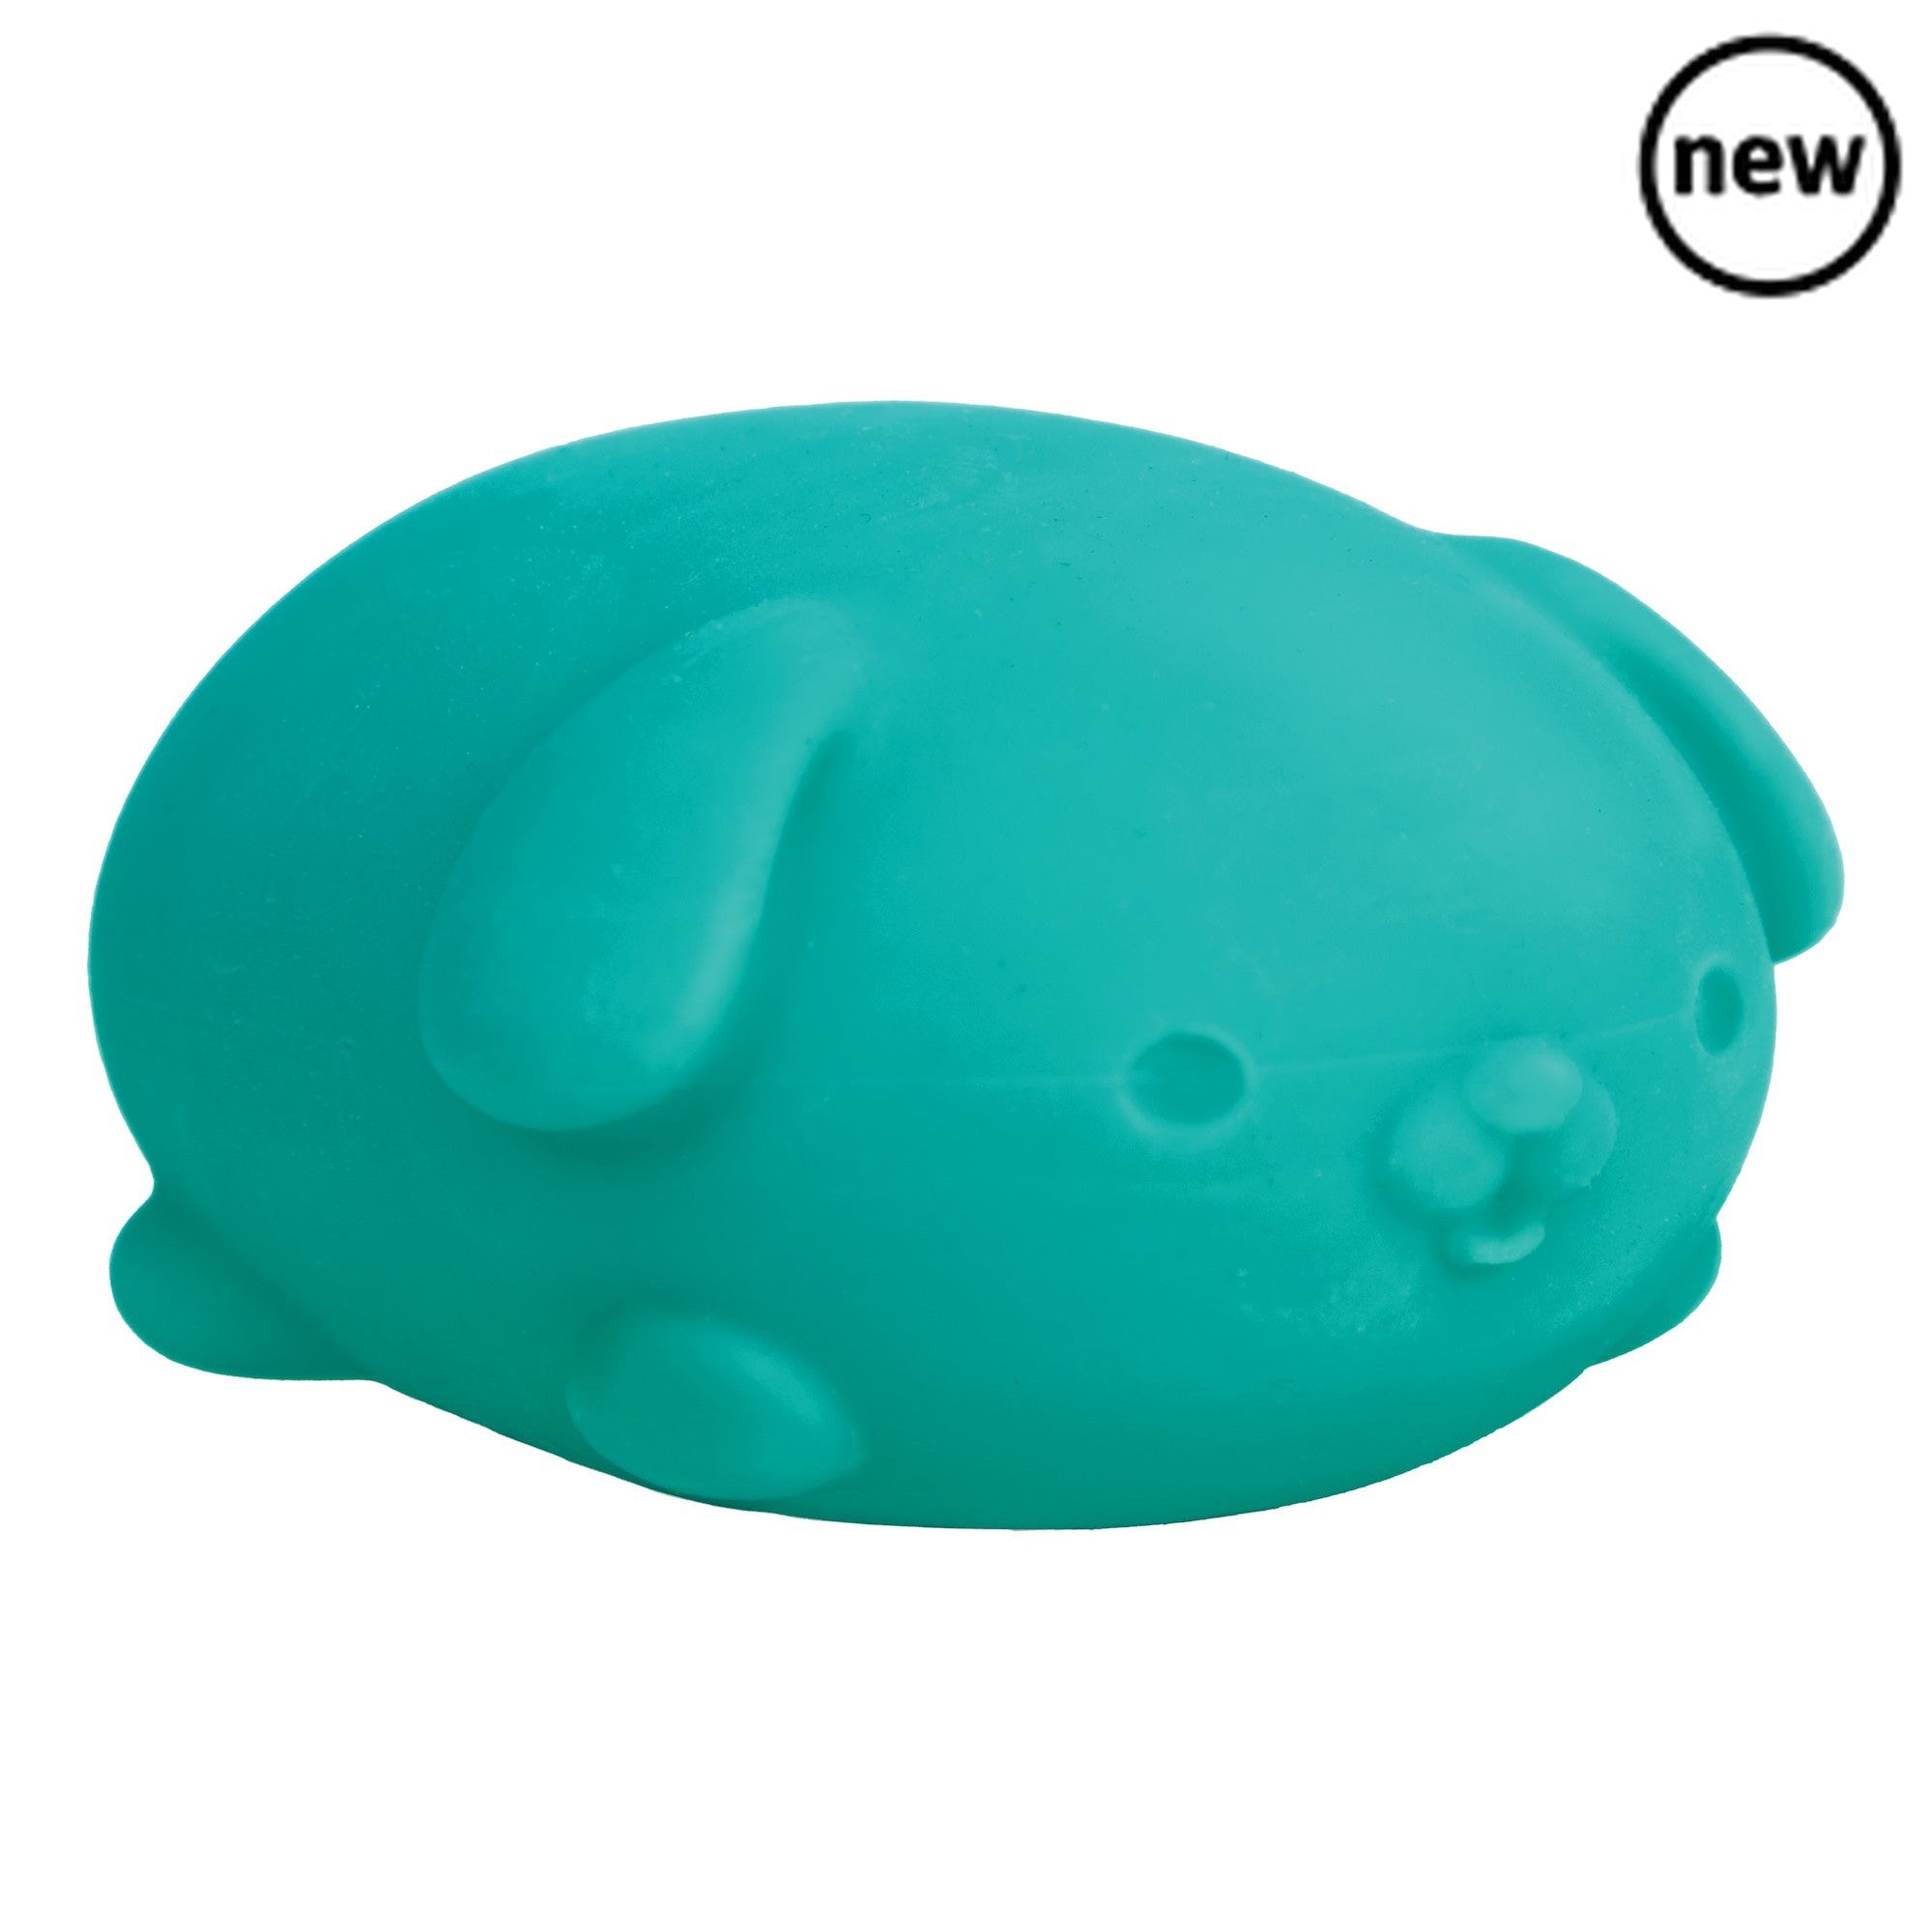 NeeDoh Funky Pup, For a ‘paw-some’ fidget toy, look no further than NeeDoh Funky Pups. Squeeze away any stress with these adorable squashy puppies. Squeeze it, squish it, or pet it. These unique Nee Doh stress balls have a tummy filled with the famous non-toxic doh and are available in four different colours (chosen at random). Features floppy ears, eyes and a cute nose. NeeDoh Funky Pups are a great fidget toy, particularly appropriate for those with ADD, ADHD, OCD, Autism, and anxiety. Gentle on little fi